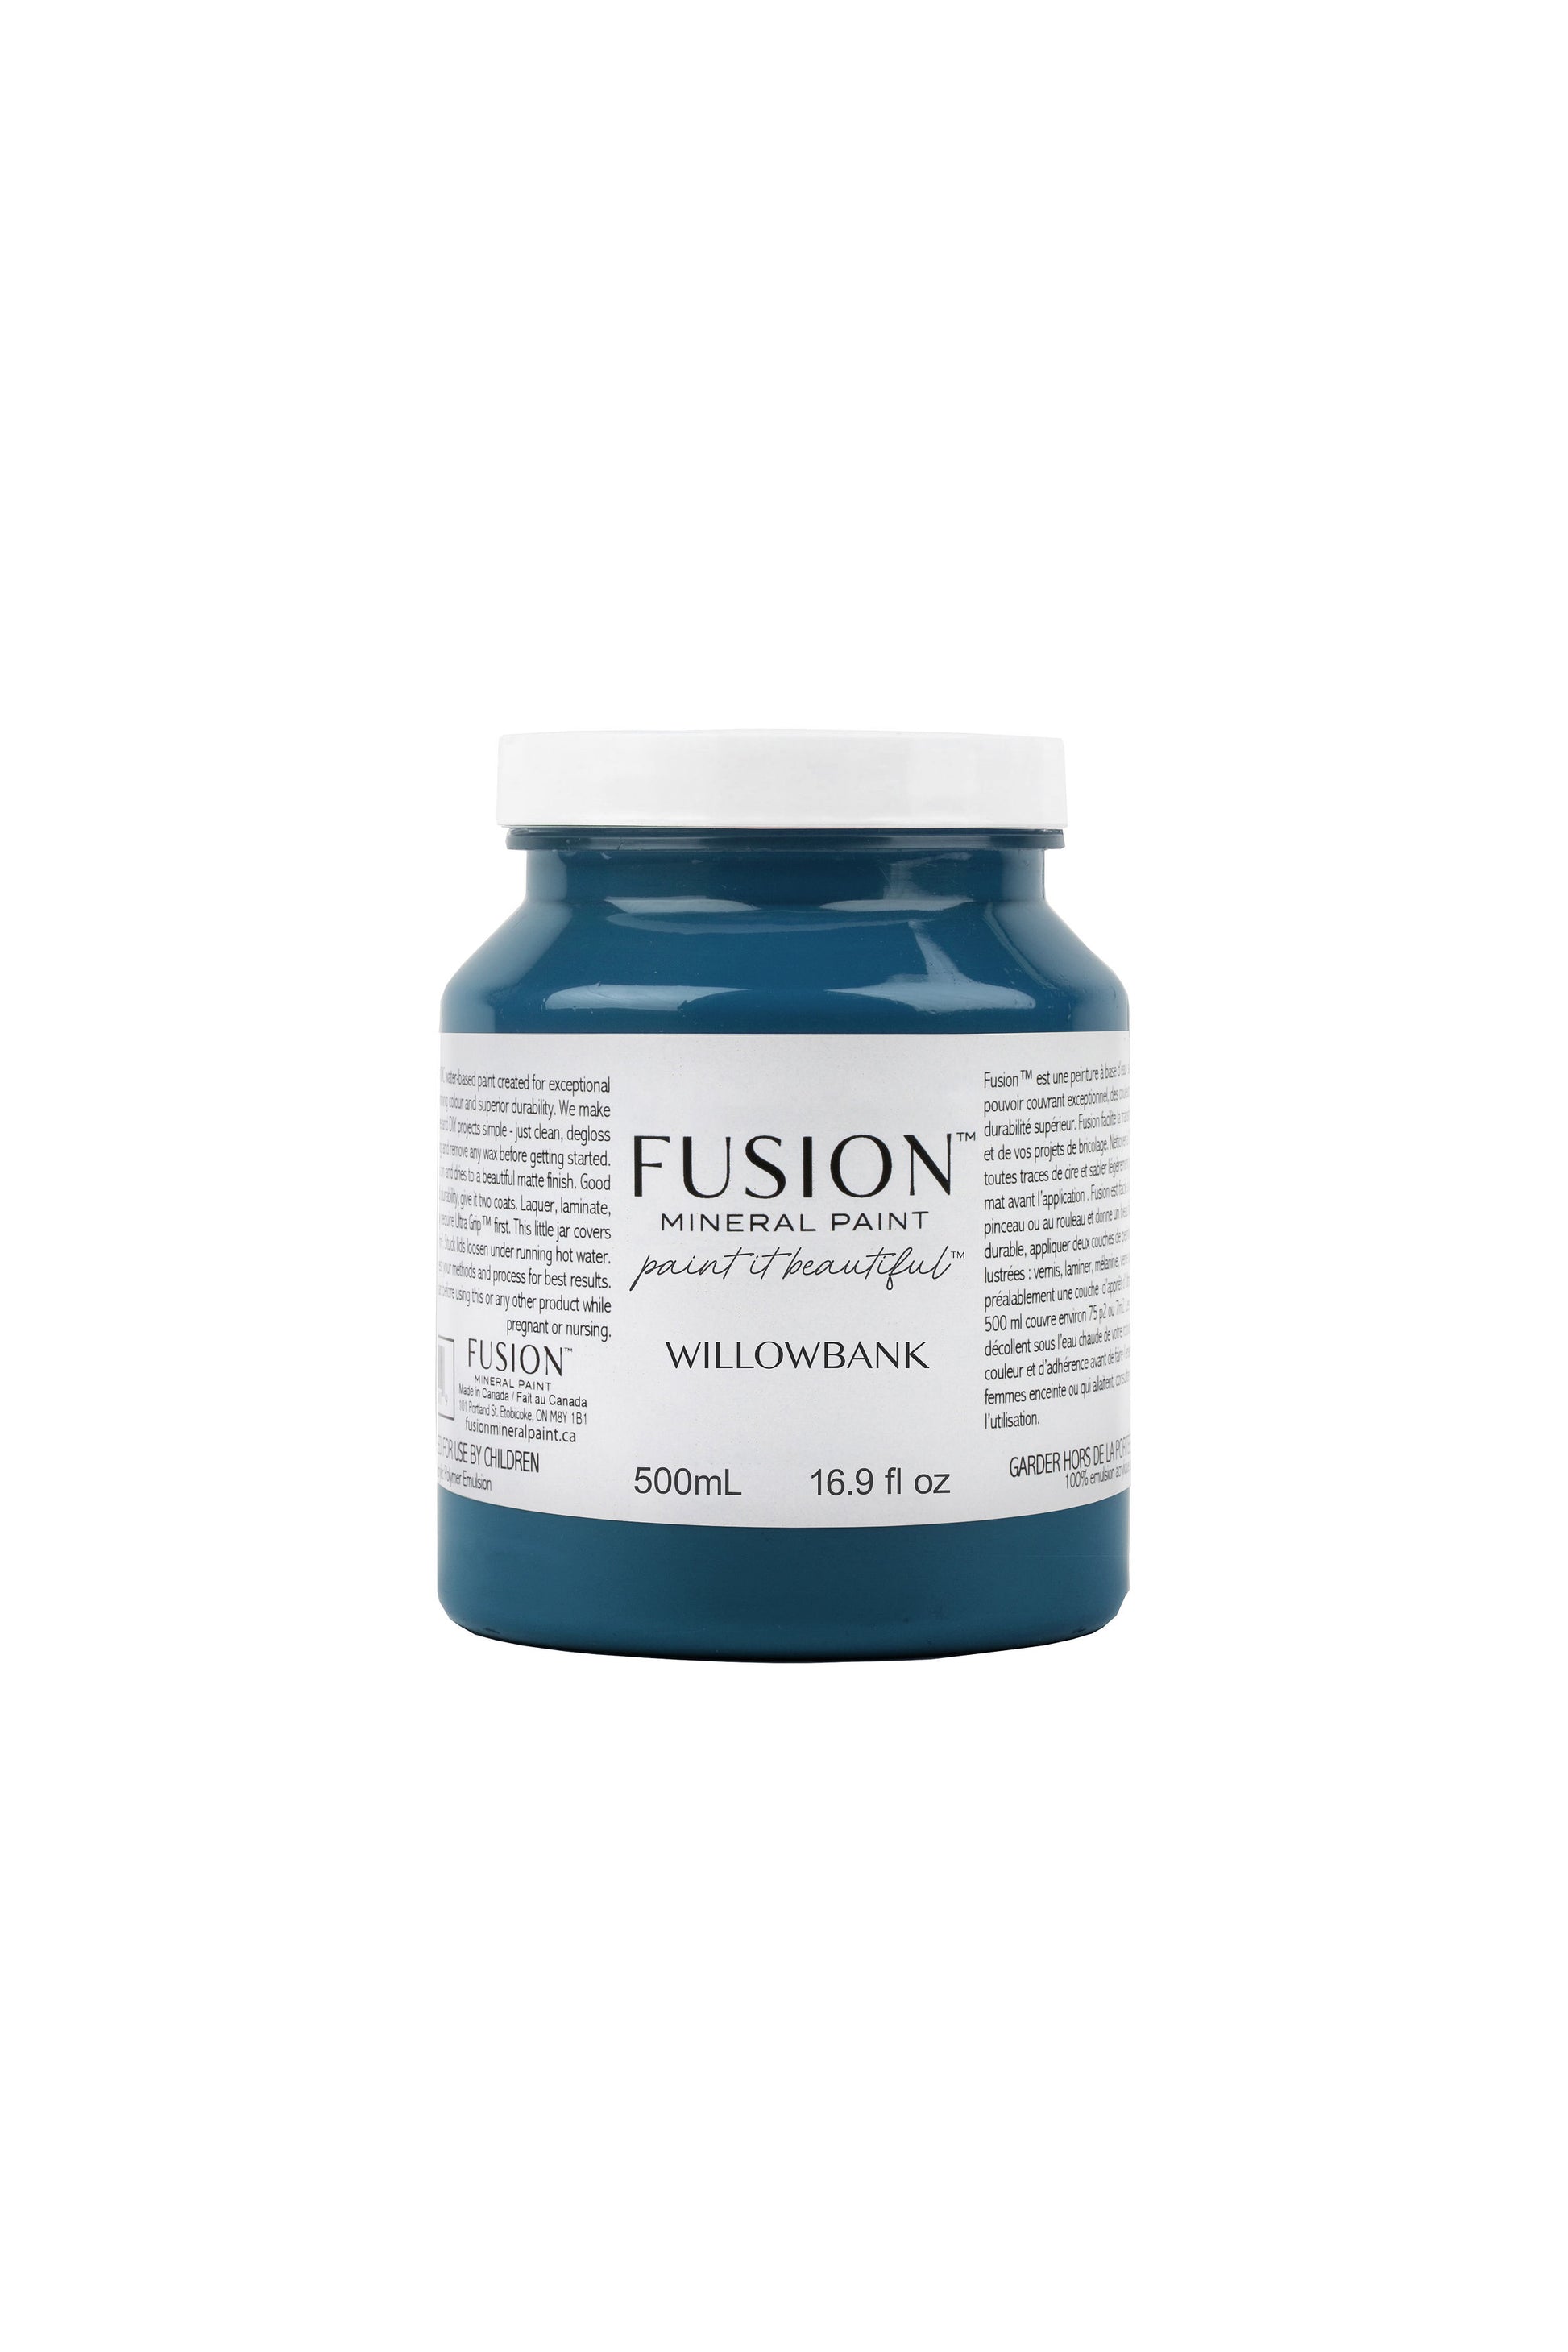 Willowbank Fusion Mineral  Paint | 500ml Pint Size